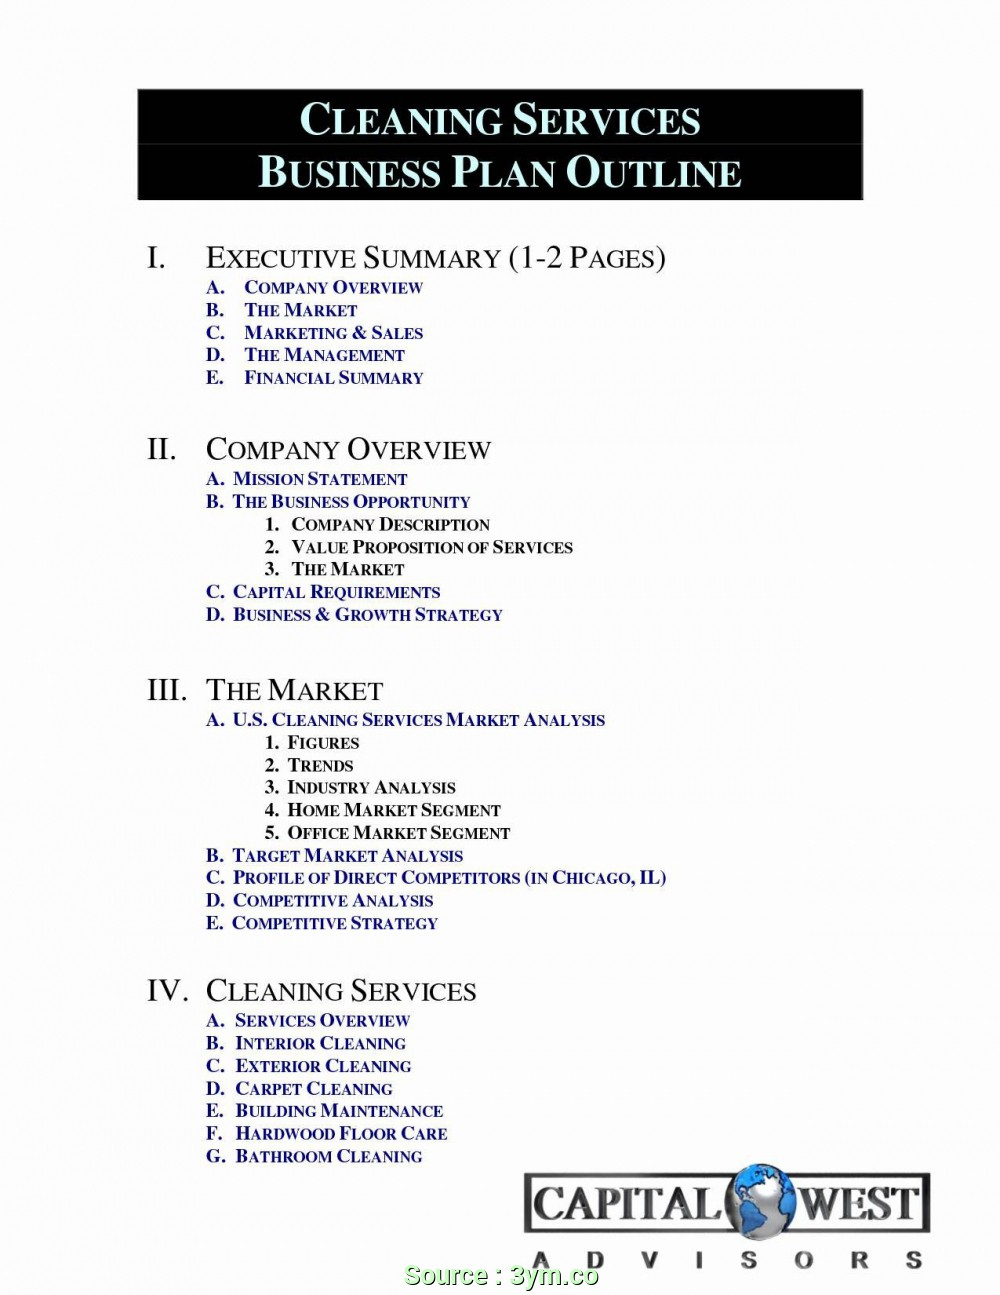 Business Plans Lawn Care Plan Template Free Practical How To Intended For Lawn Care Business Plan Template Free